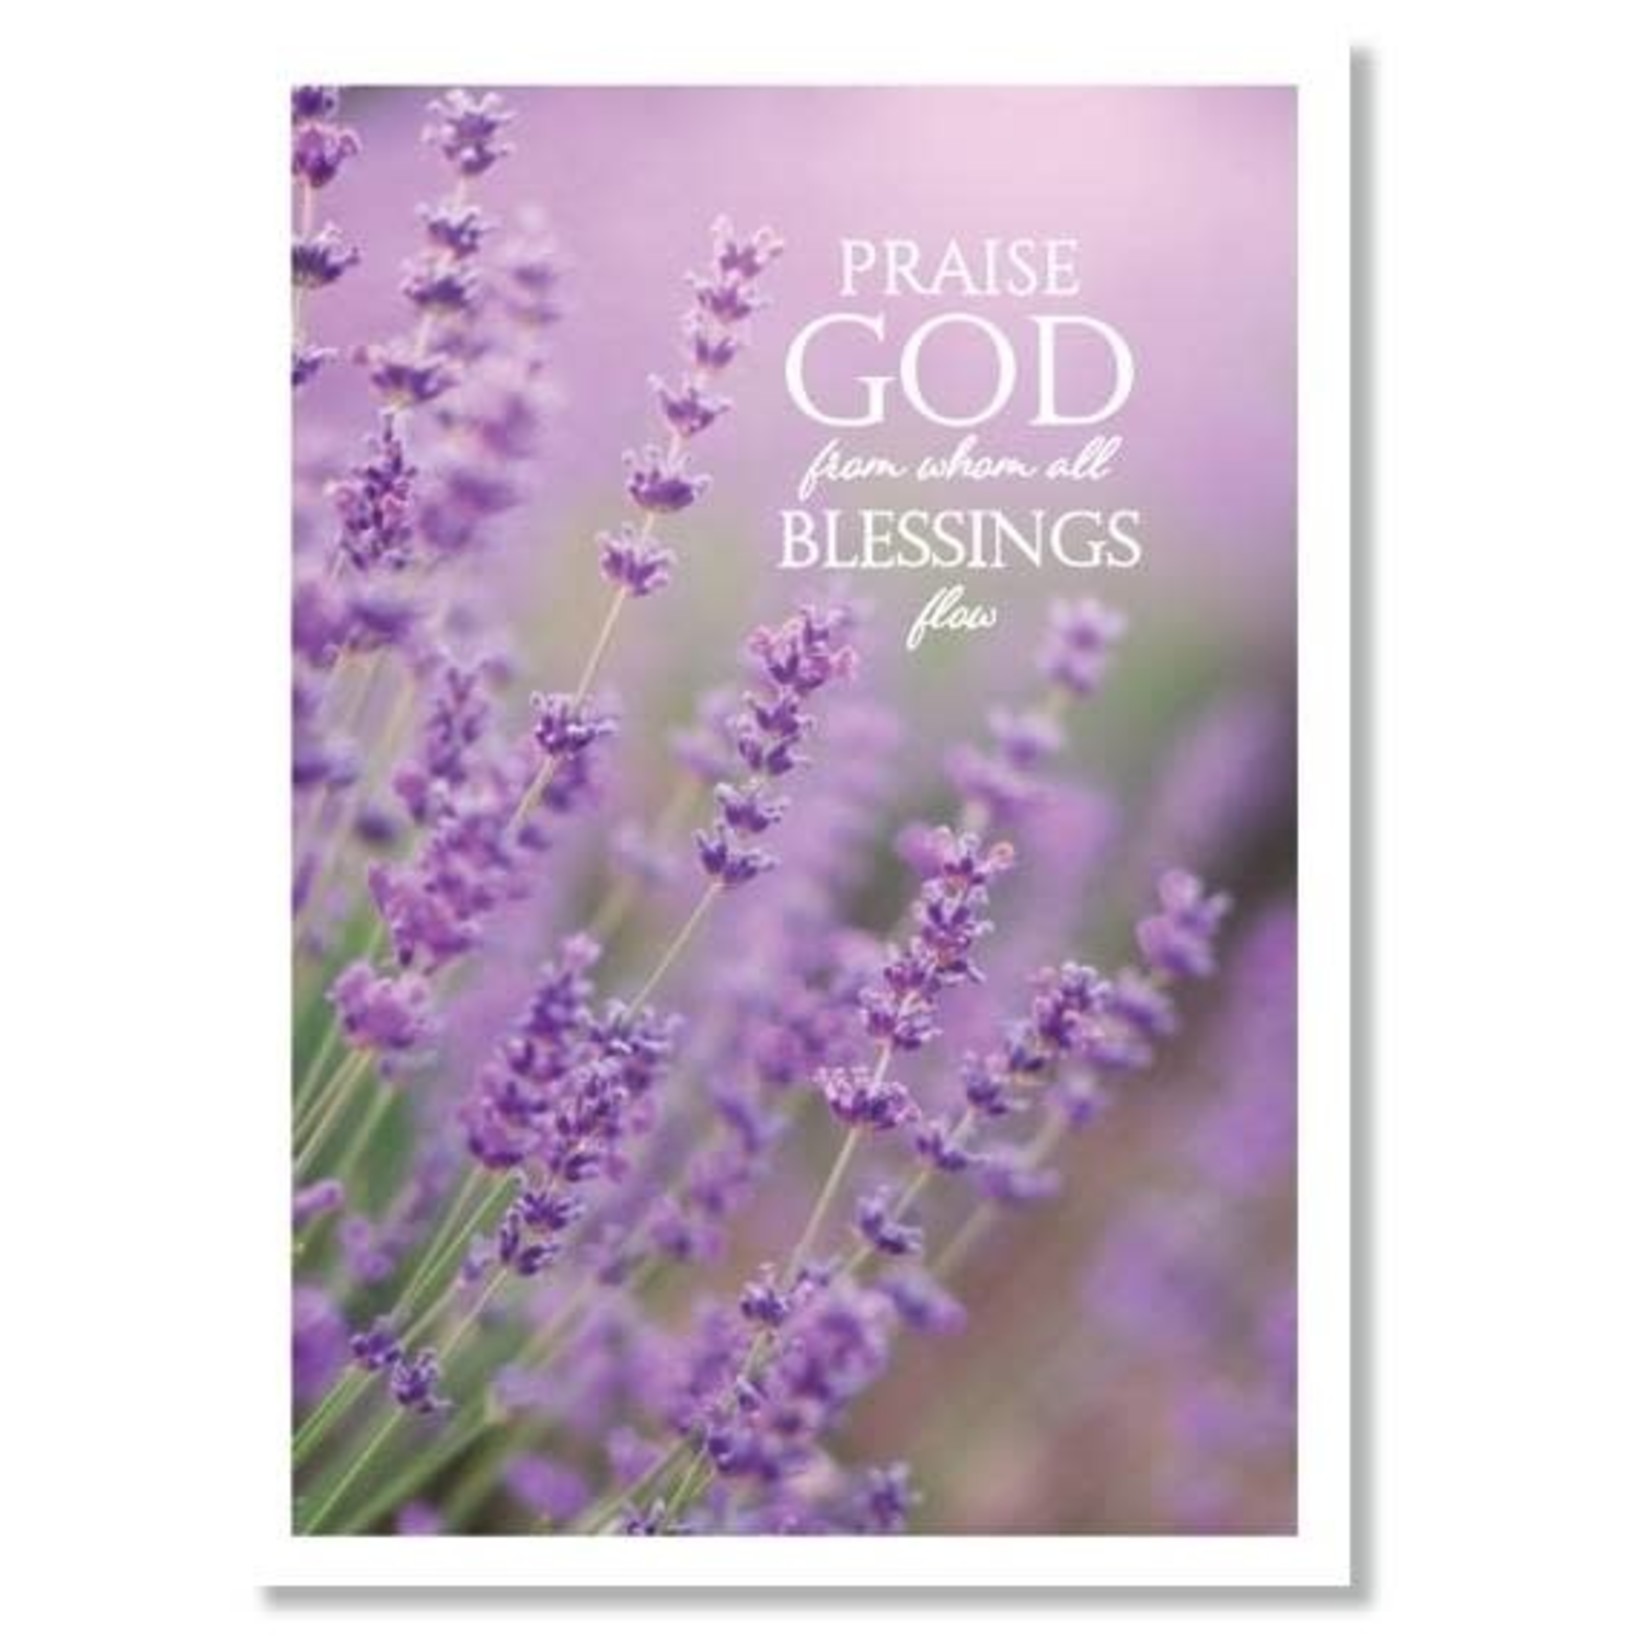 Hymns In My Heart - 5x7" Greeting Card - Wedding - Praise God From Whom All Blessings Flow